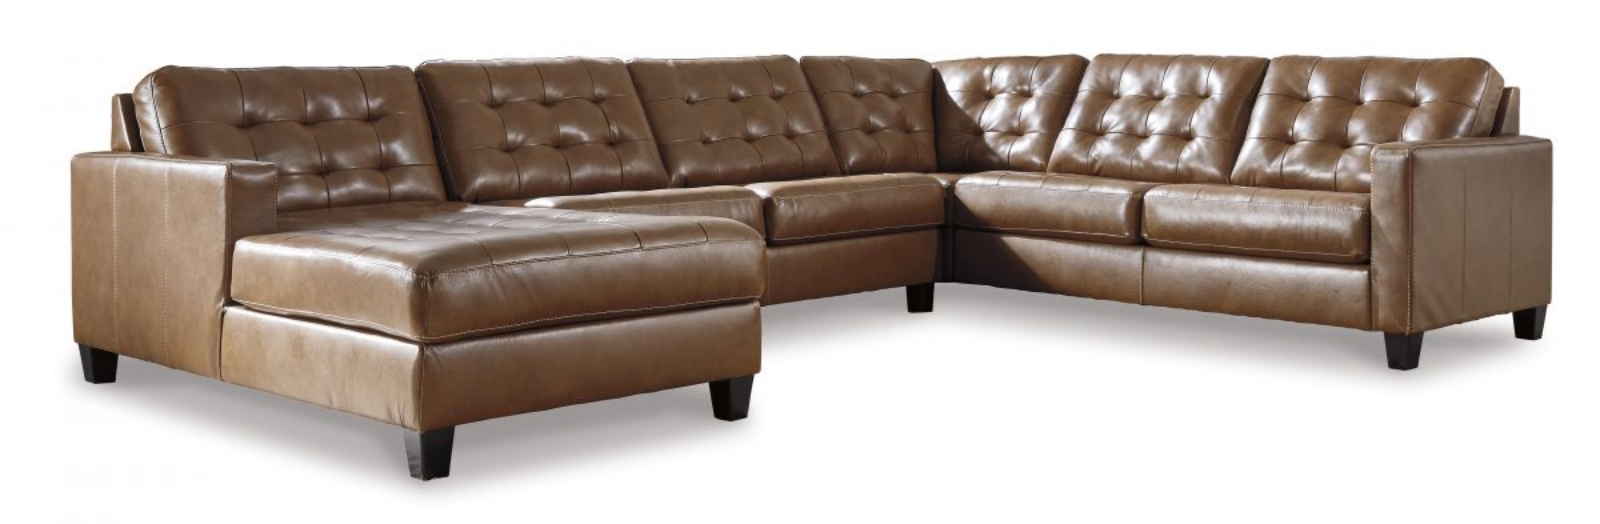 Picture of Baskove Sectional